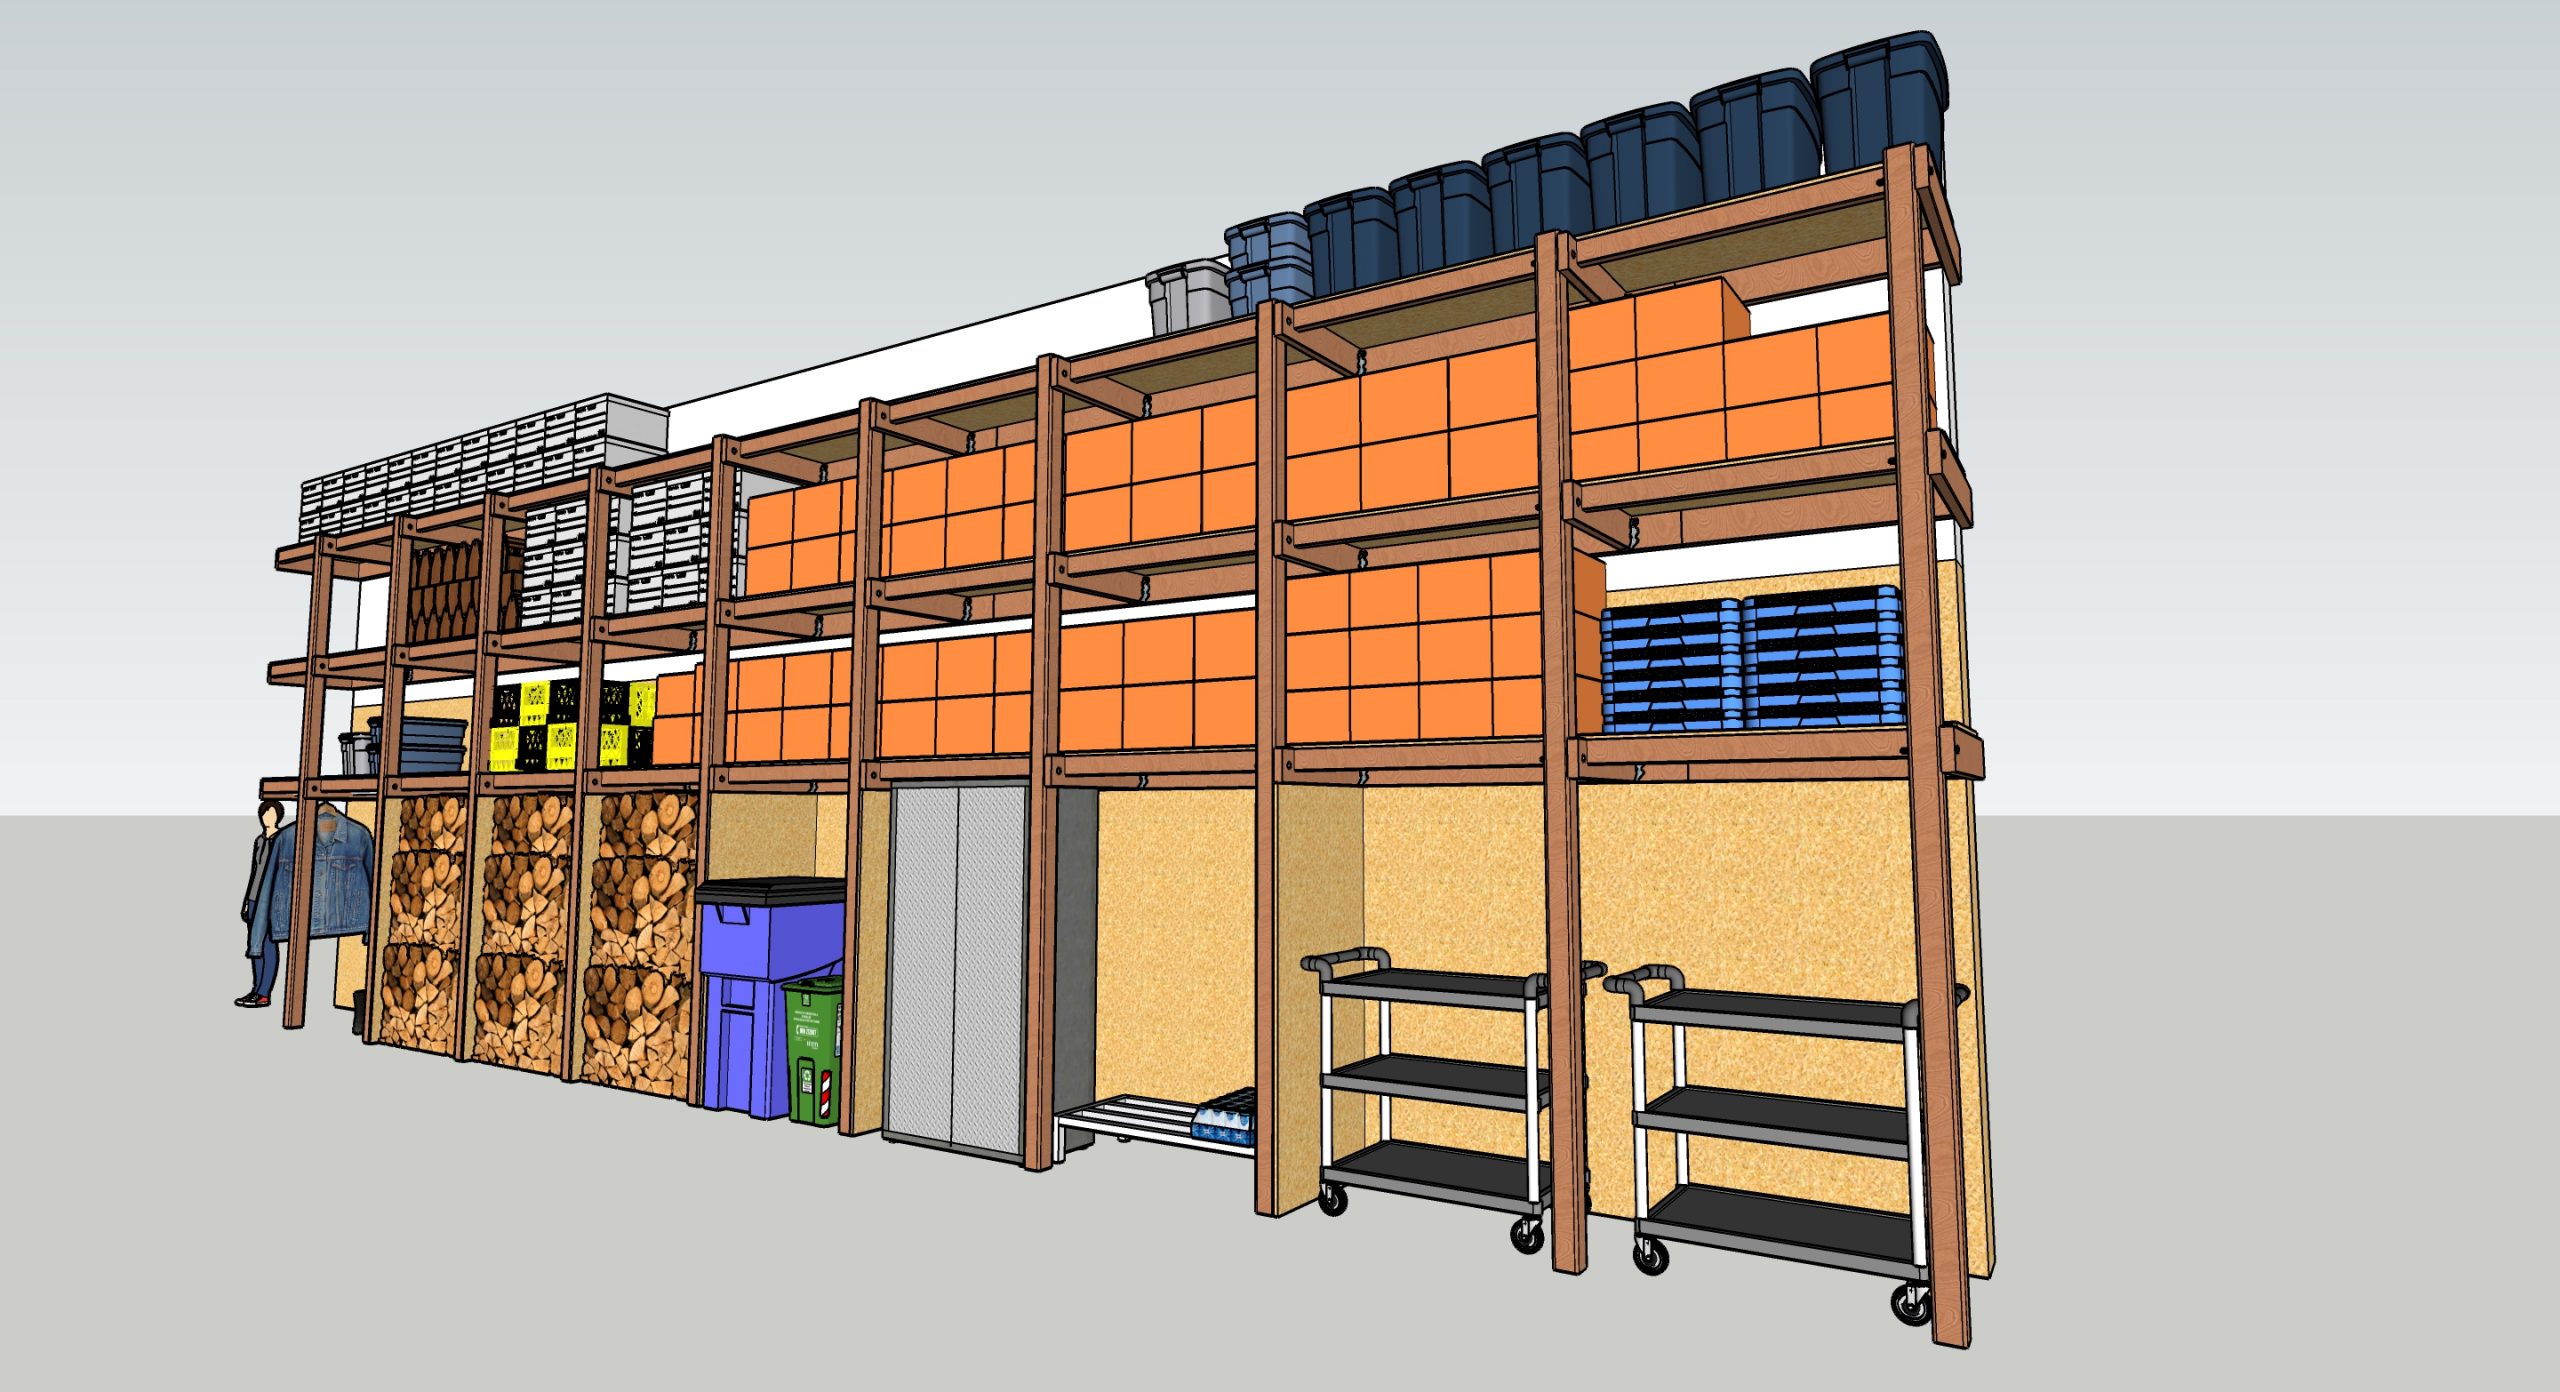 3D rendering of Prairie Dog Brewing's back-hallway storage shelving design, including the kinds of things we planned on storing in the shelving.